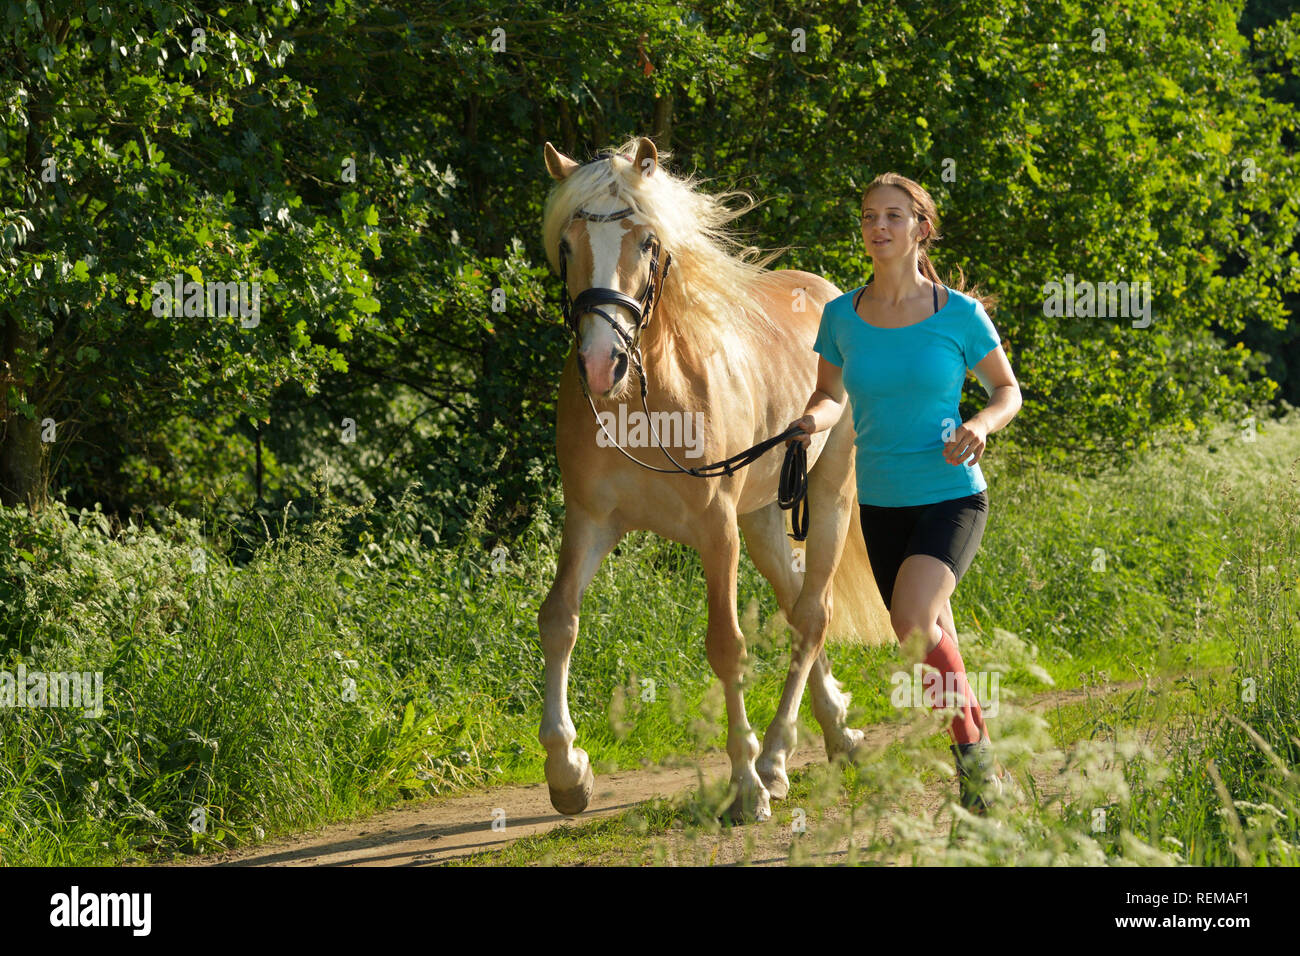 Horse stock photography and - Alamy